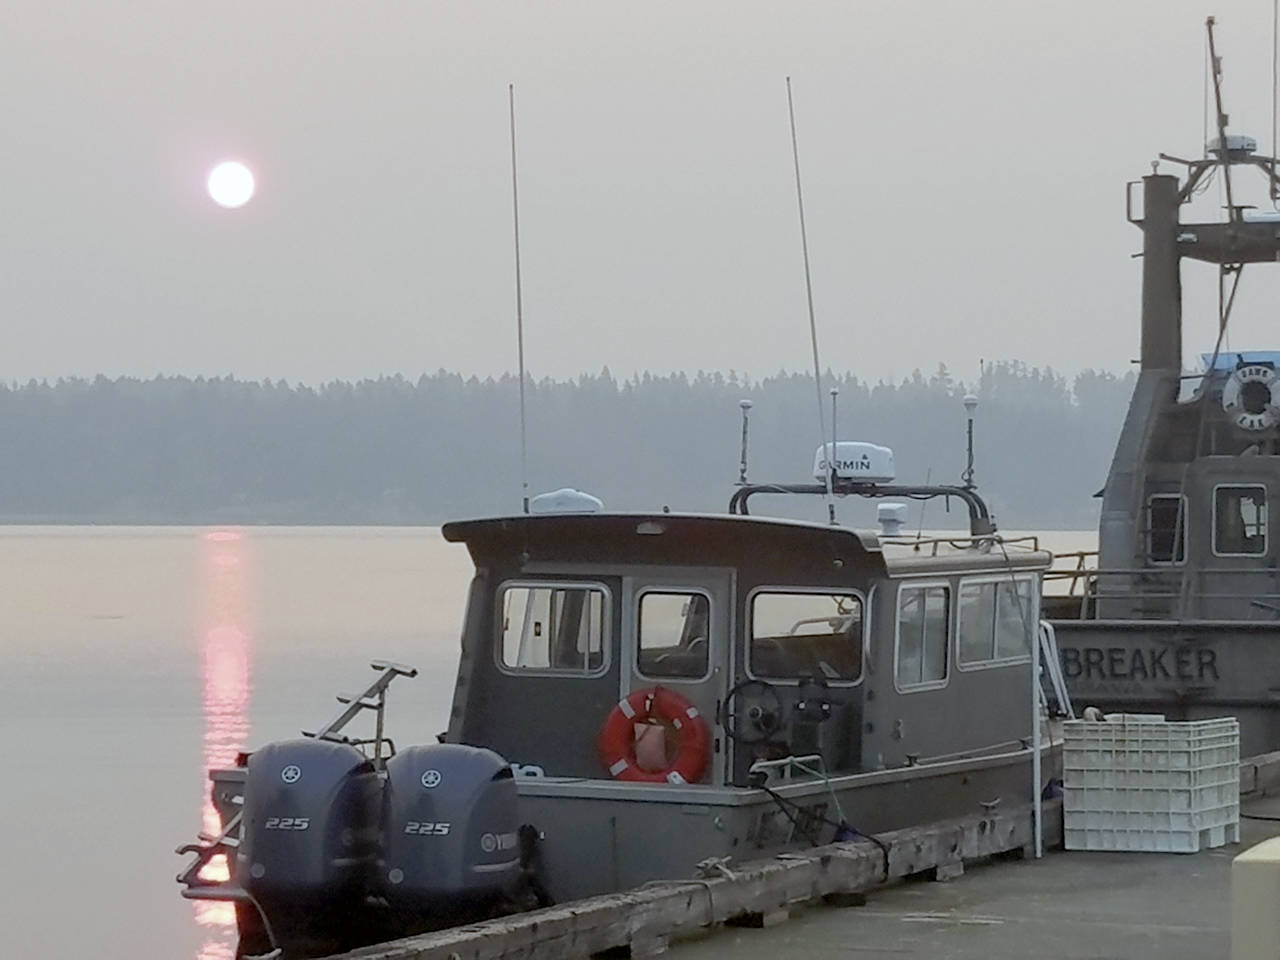 A blood-orange sun rises over Bainbridge Island the morning of Aug. 3 as fishing boats at Brownsville Marina await their crews. Ironically, the name of the boat on the right is “Dawn Breaker.” The colorful sunrise is due to the smoke from forest fires in Canada.                                Terryl Asla/Kitsap News Group